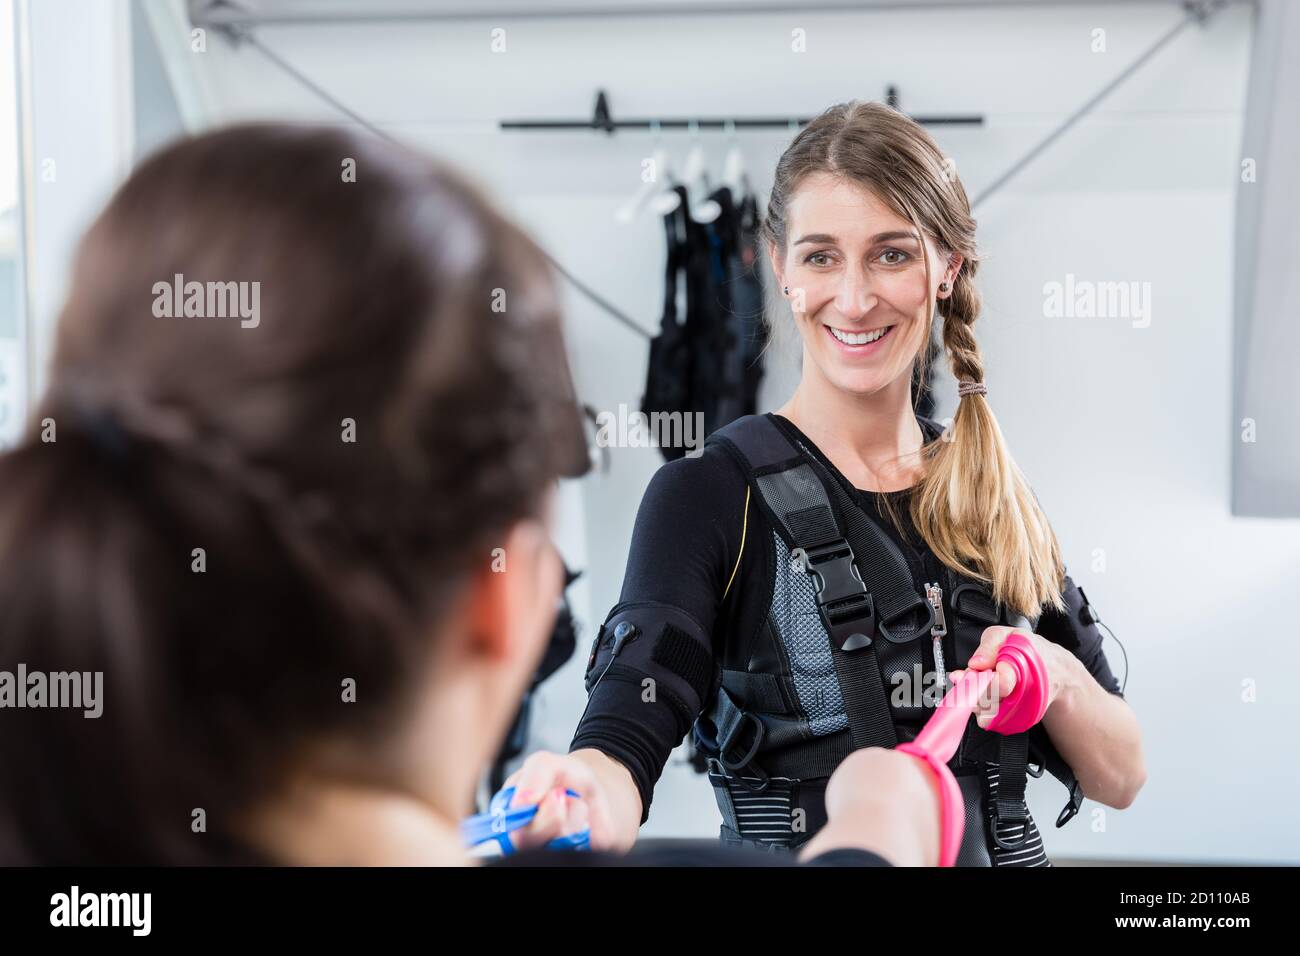 Skinny and plump woman having ems training together Stock Photo